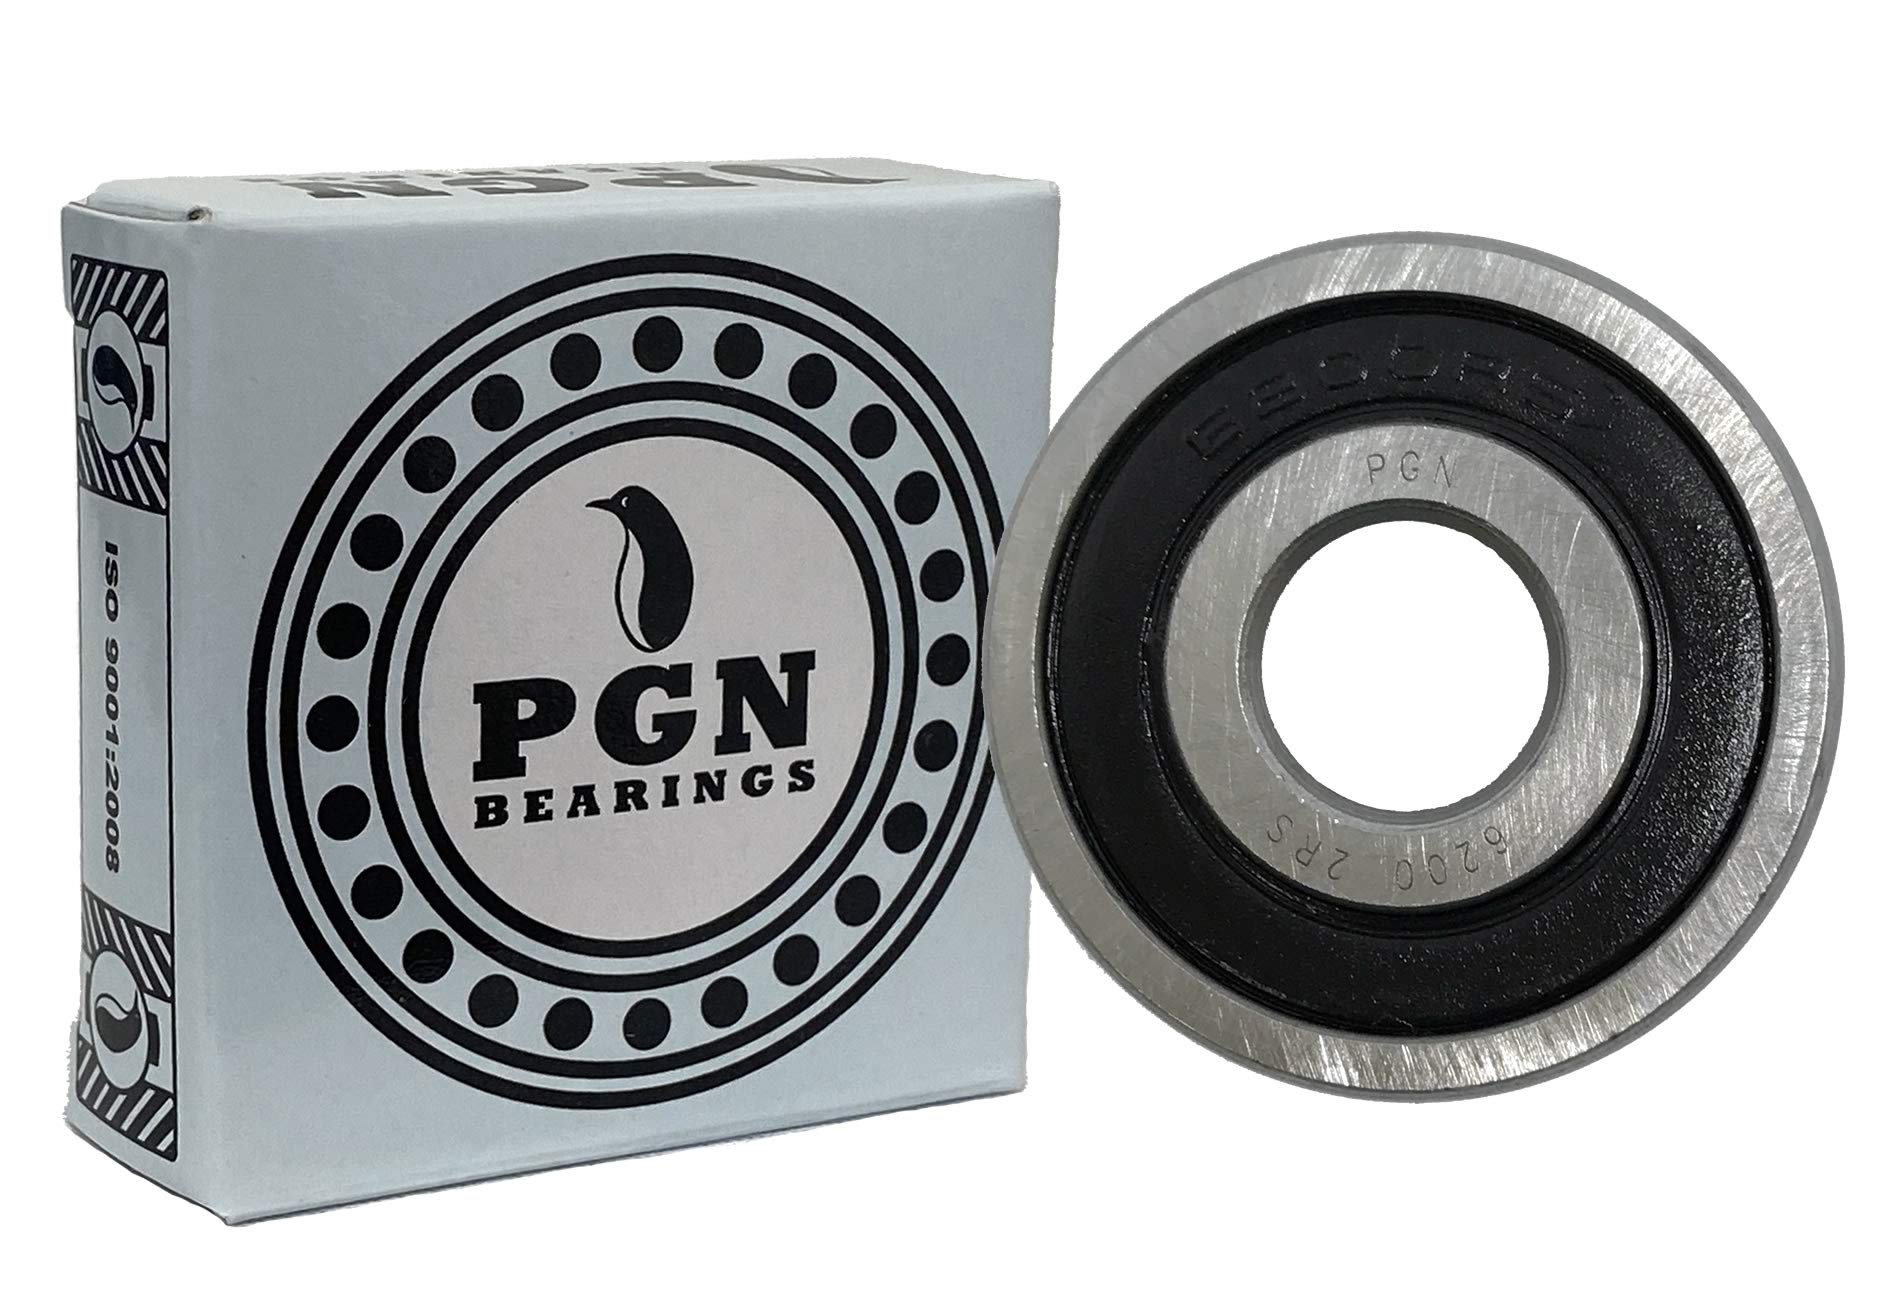 PGN Bearings (10 Pack) Pgn 6200-2Rs Sealed Ball Bearing - C3-10X30X9 - Lubricated - Chrome Steel